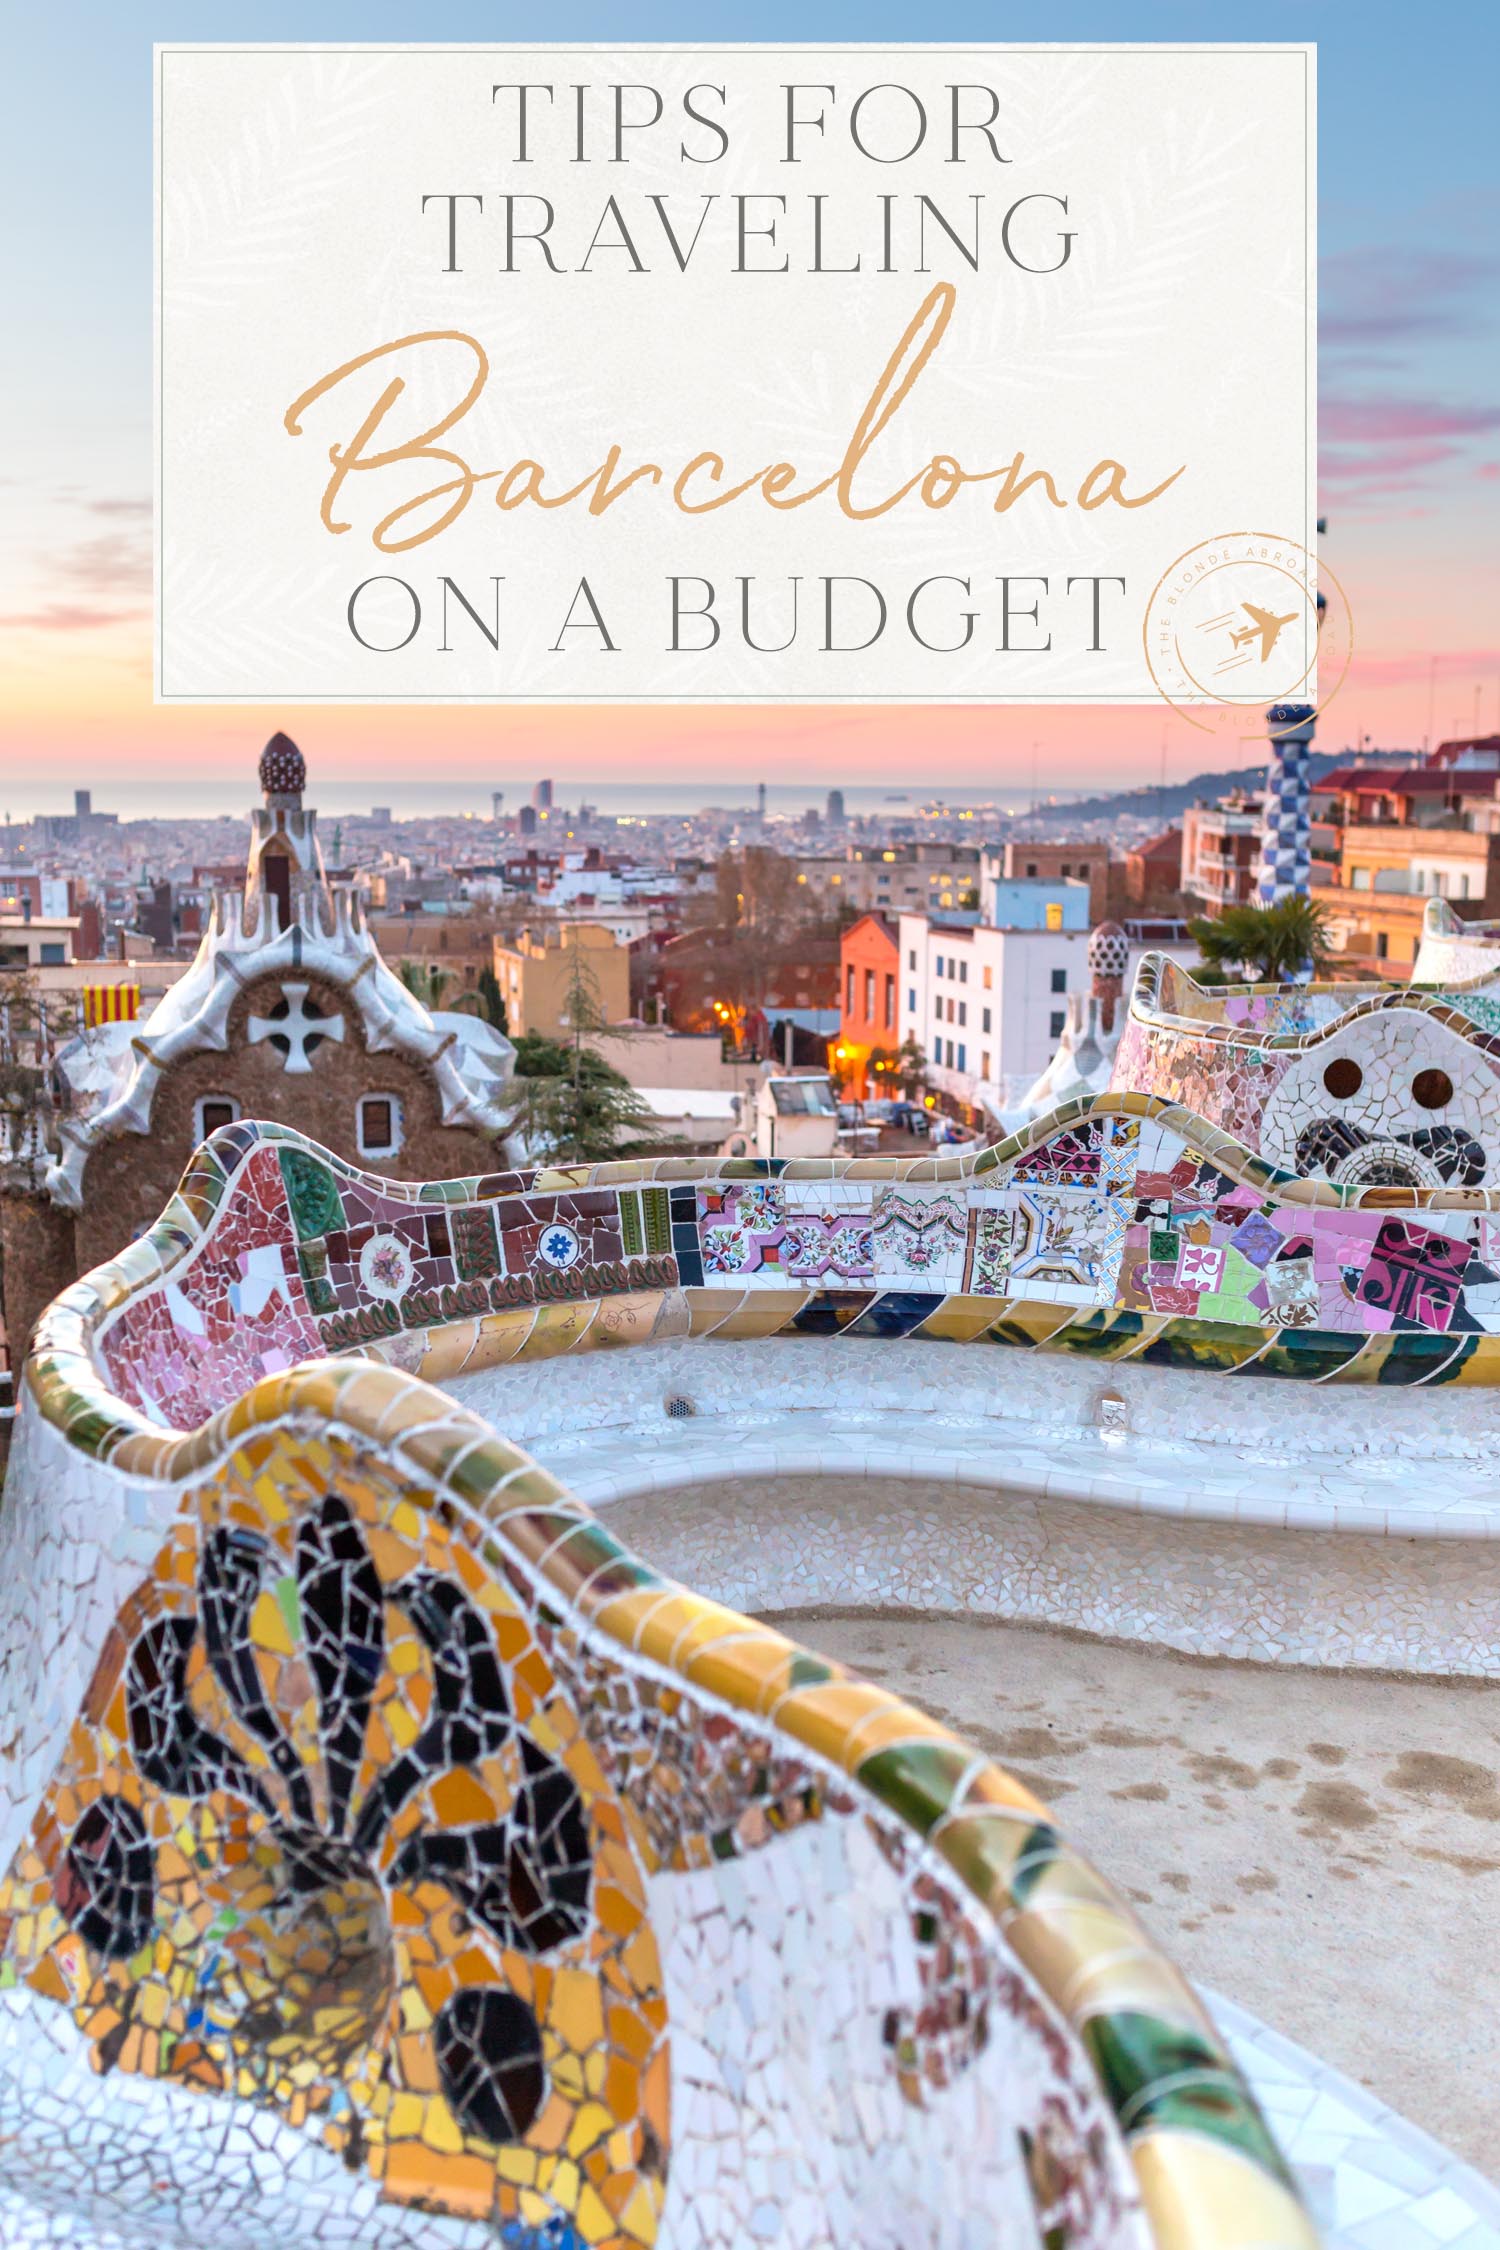 Tips for Traveling Barcelona on a Budget